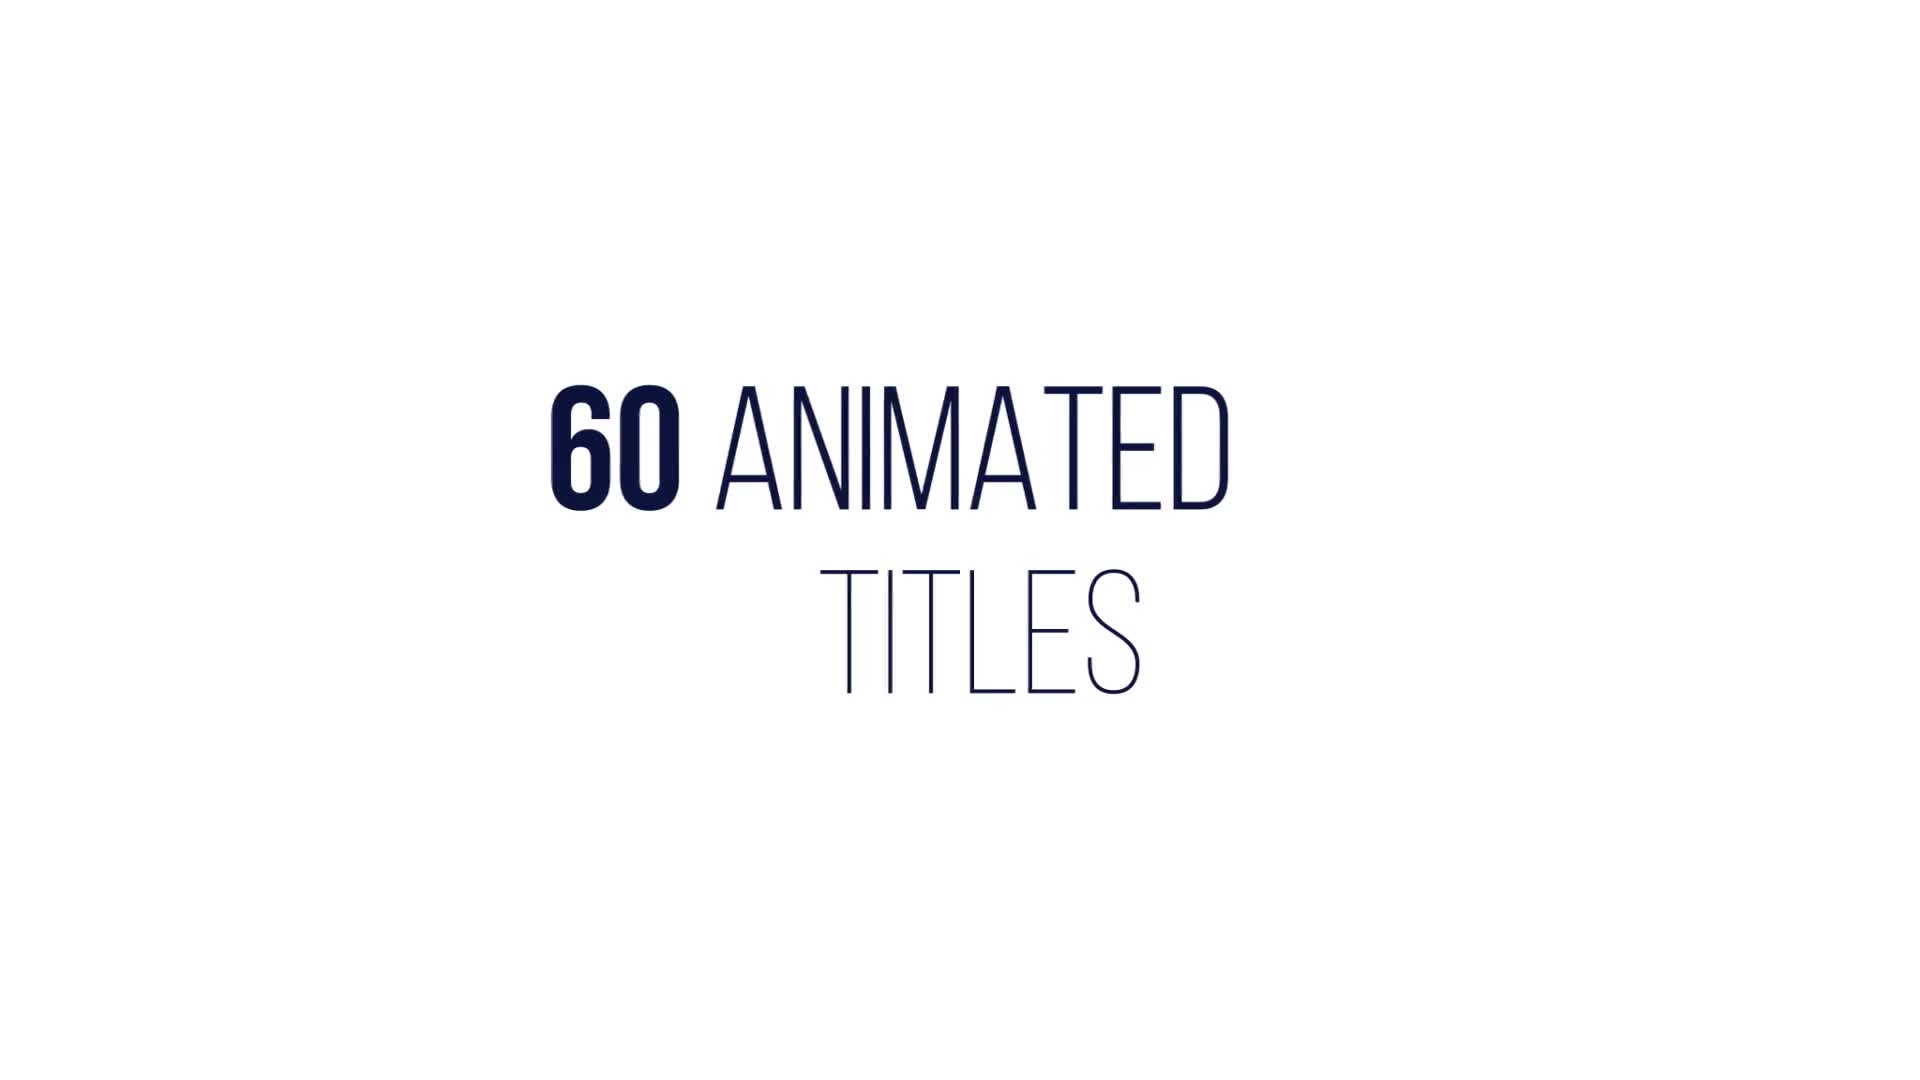 60 Animated Titles - Download Videohive 11847376